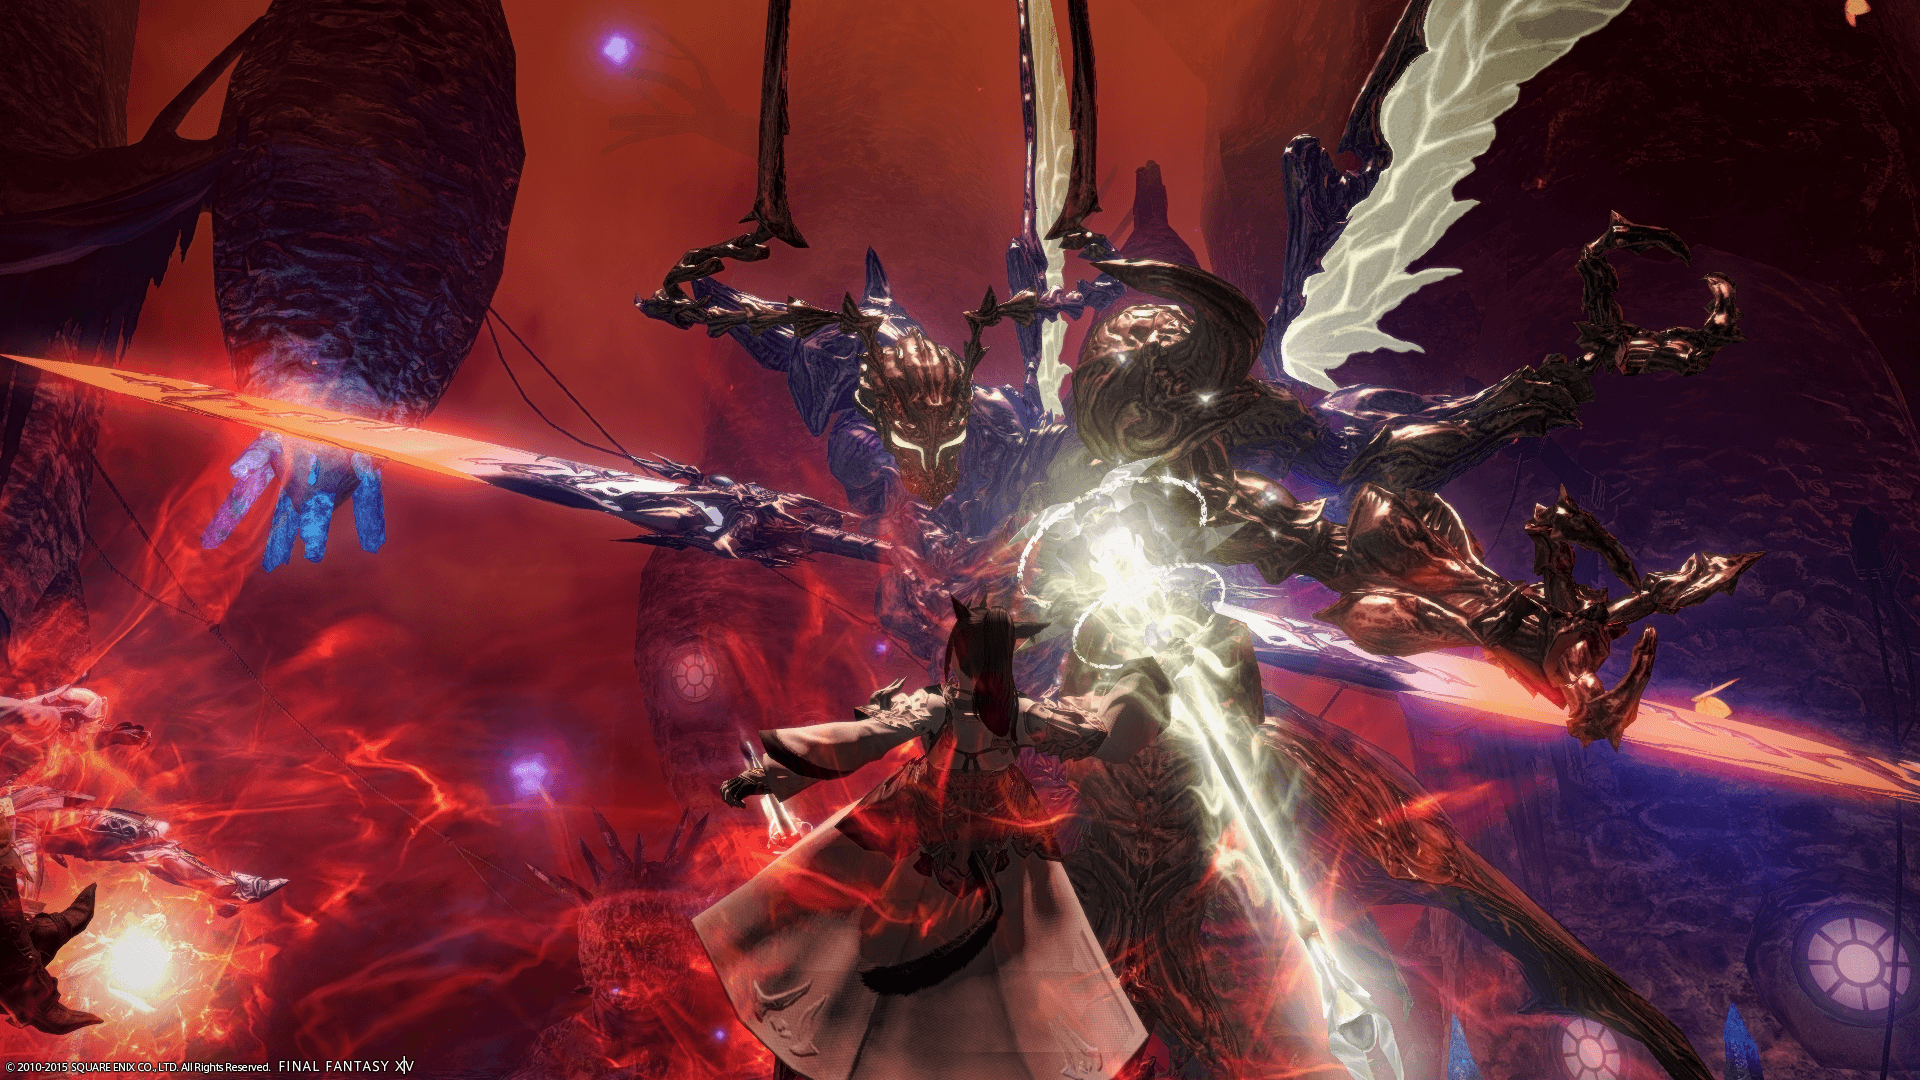 Ran Ravana to help a friend and got one of the best action shots I